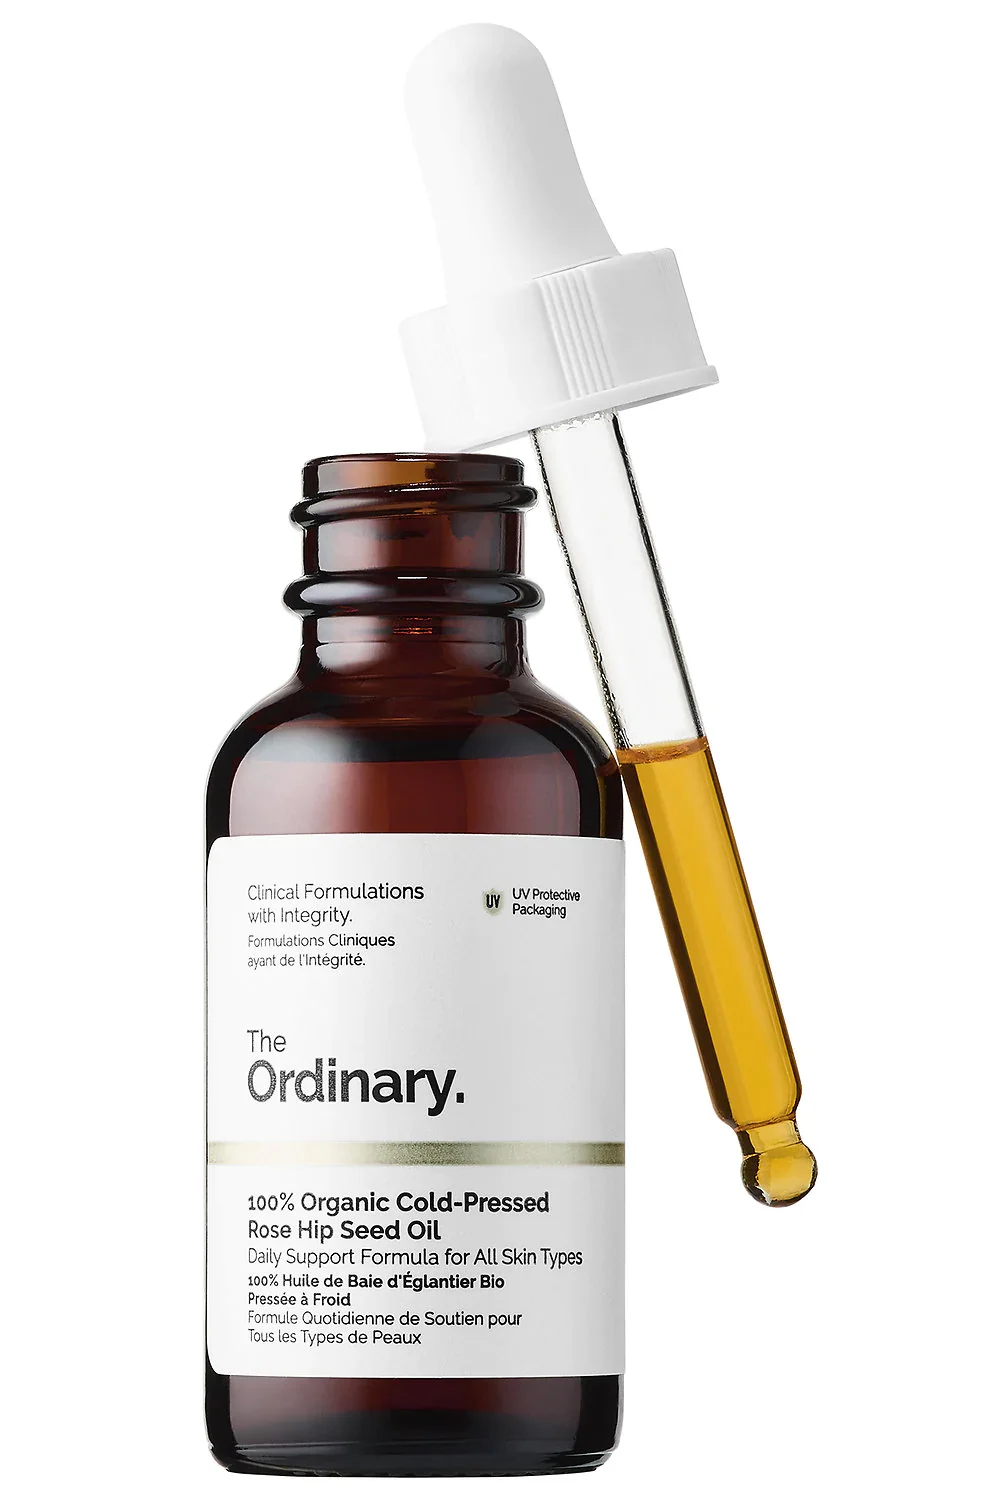 2. The Ordinary 100% Organic Cold-Pressed Rose Hip Seed Regenerative Oil